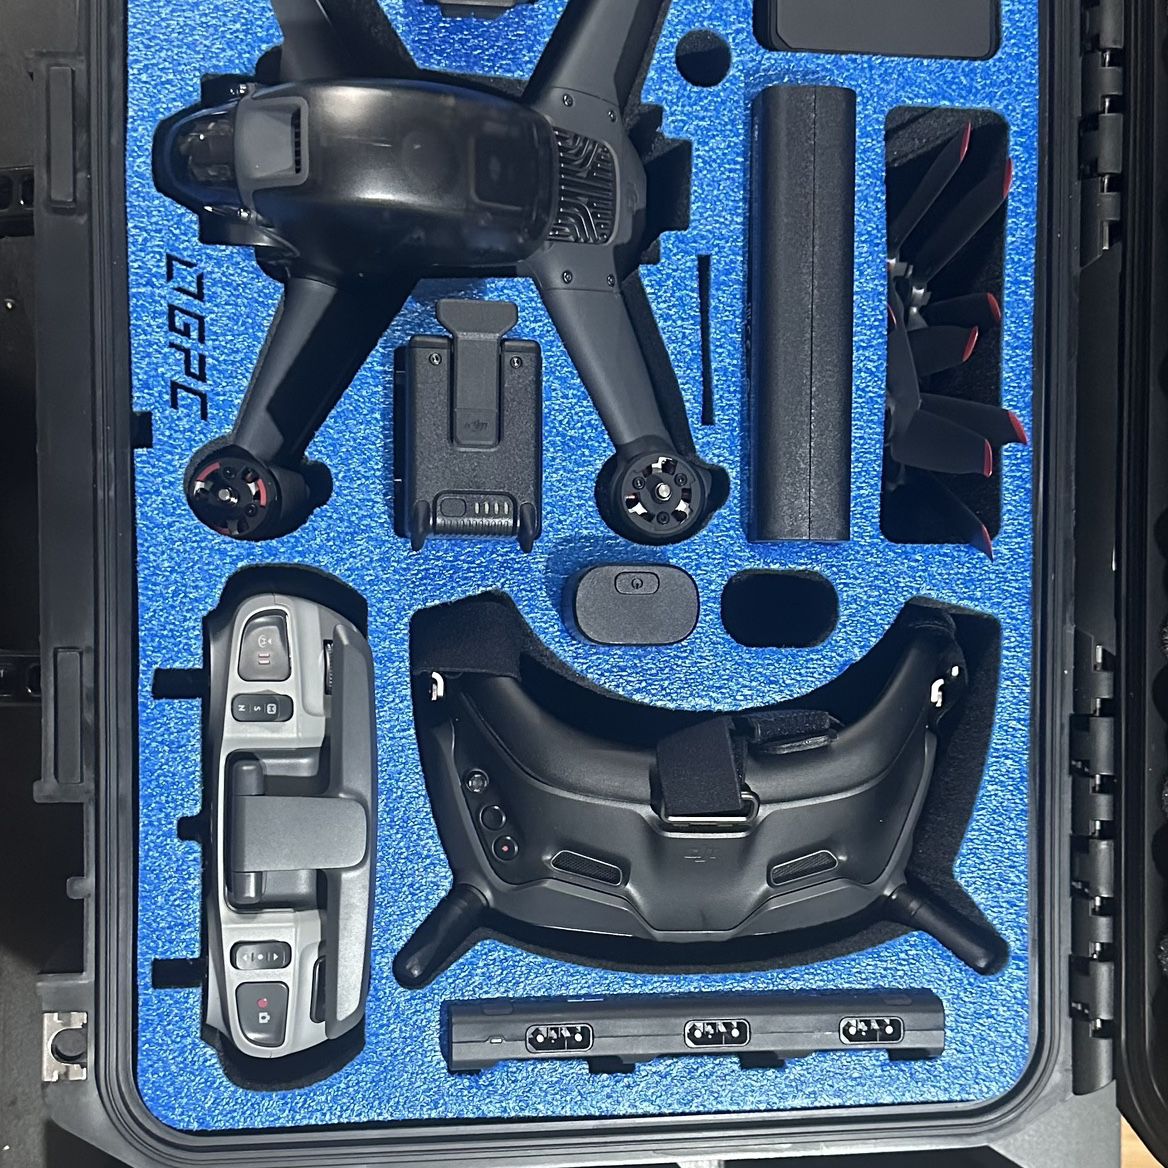 DJI FPV Drone With 5 Batteries And Hard Case